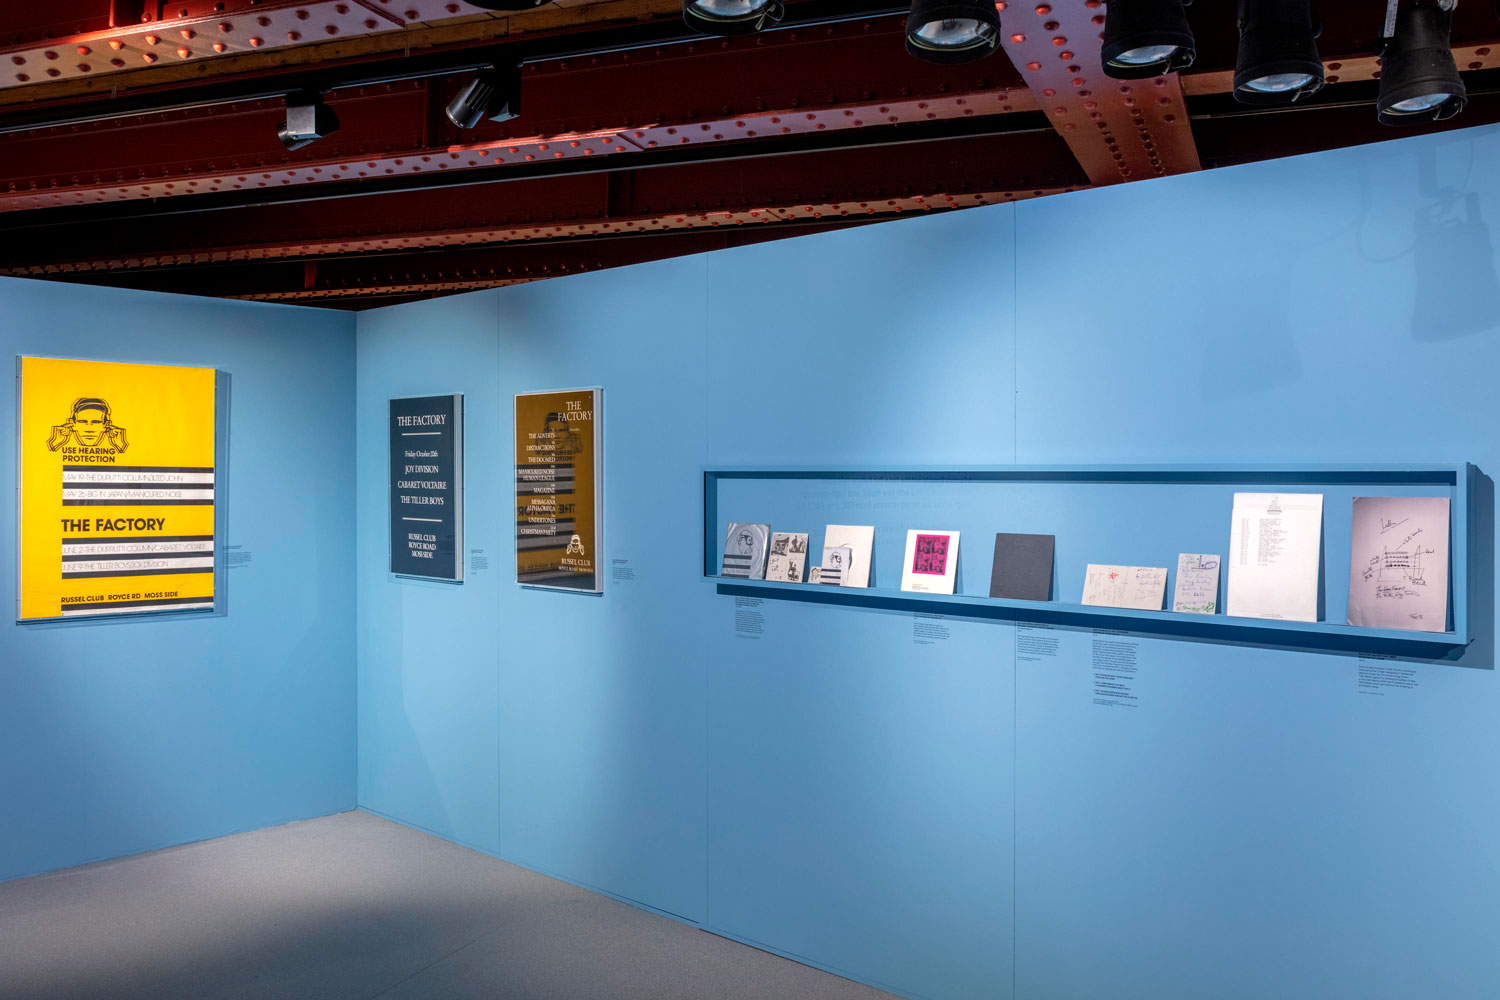 Gallery view of part of the FAC 1-50 display in Use Hearing Protection: The early years of Factory Records at the Science and Industry Museum